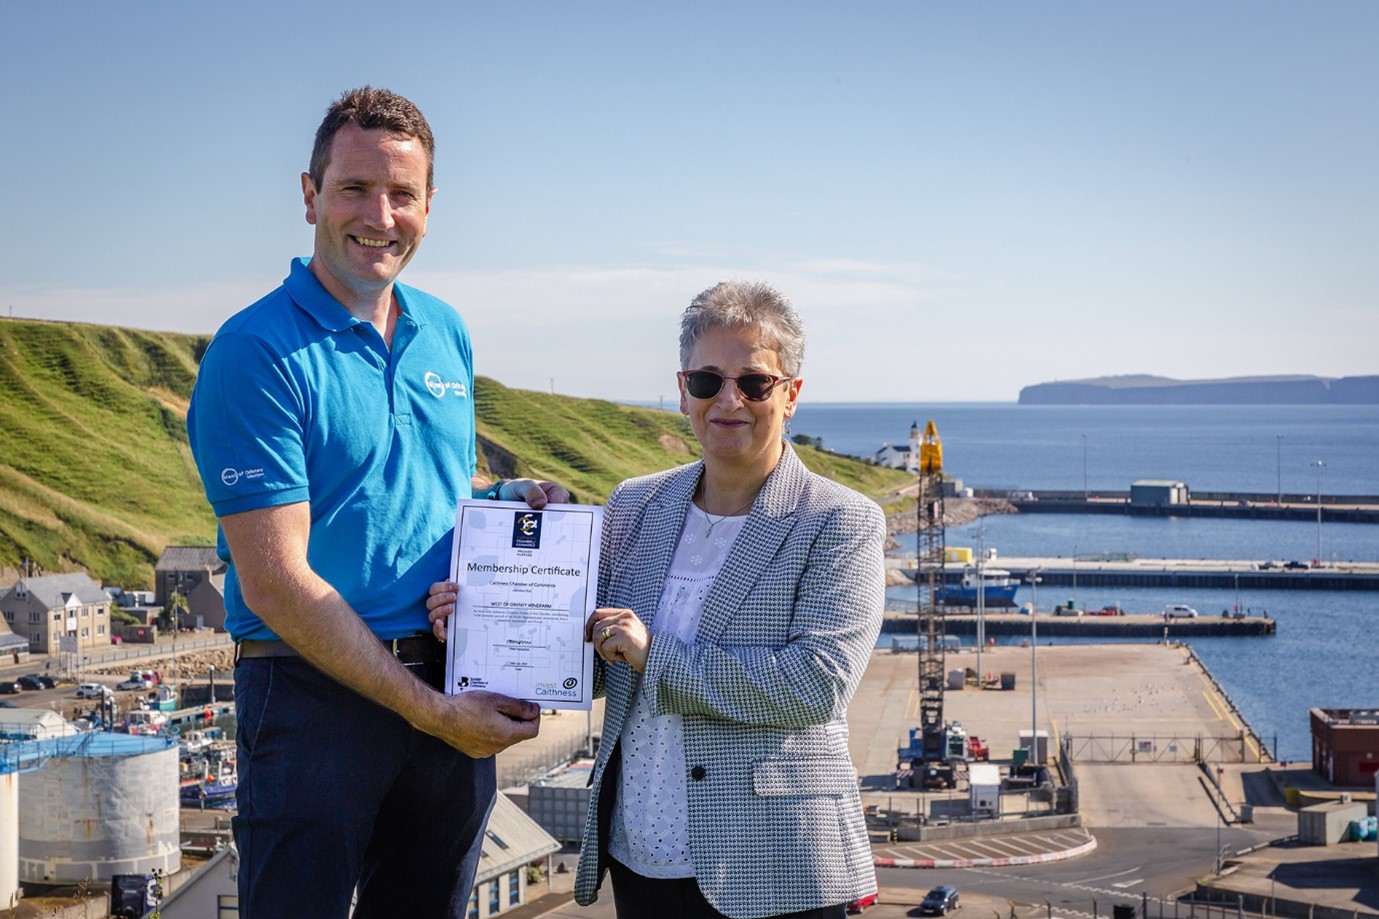 Jack Farnham Development Manager West of Orkney Windfarm with Trudy Morris, CEO, Caithness Chamber of Commerce at Scrabster Harbour. 